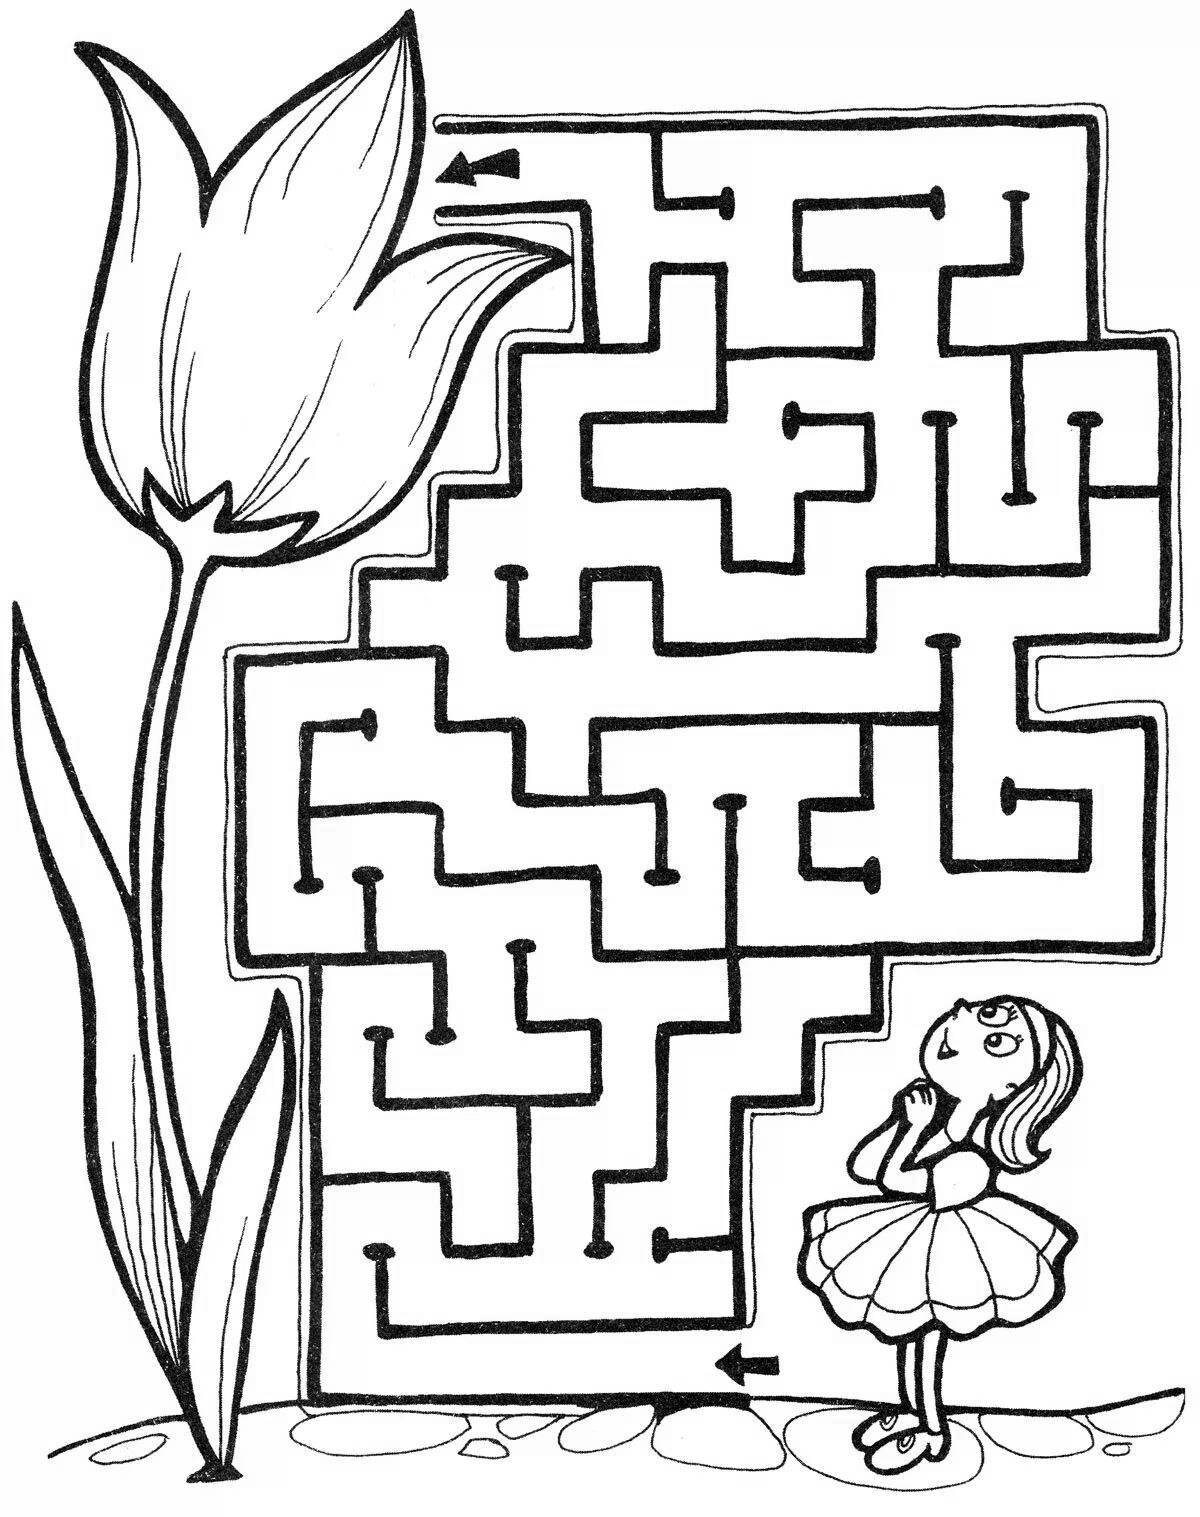 Fantastic coloring pages for girls 5 years old